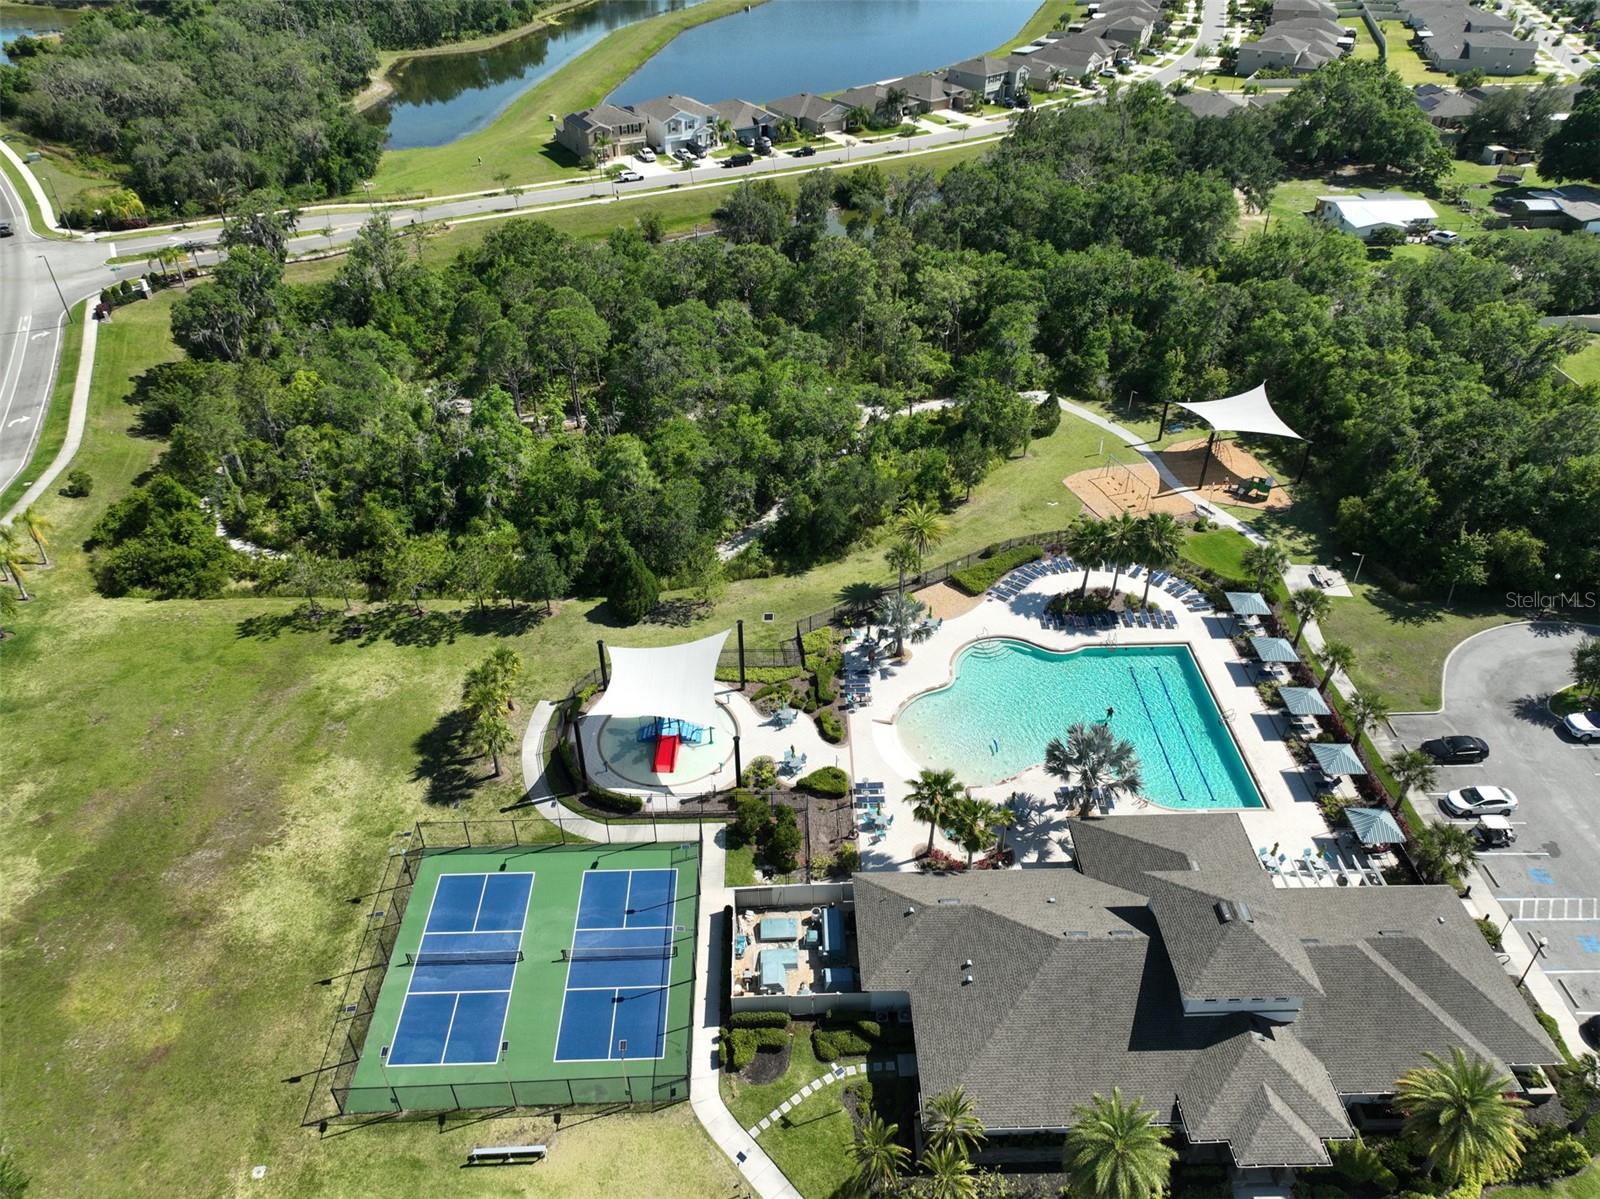 Club house, tennis courts, pool, splash pad, playground and fitness center.